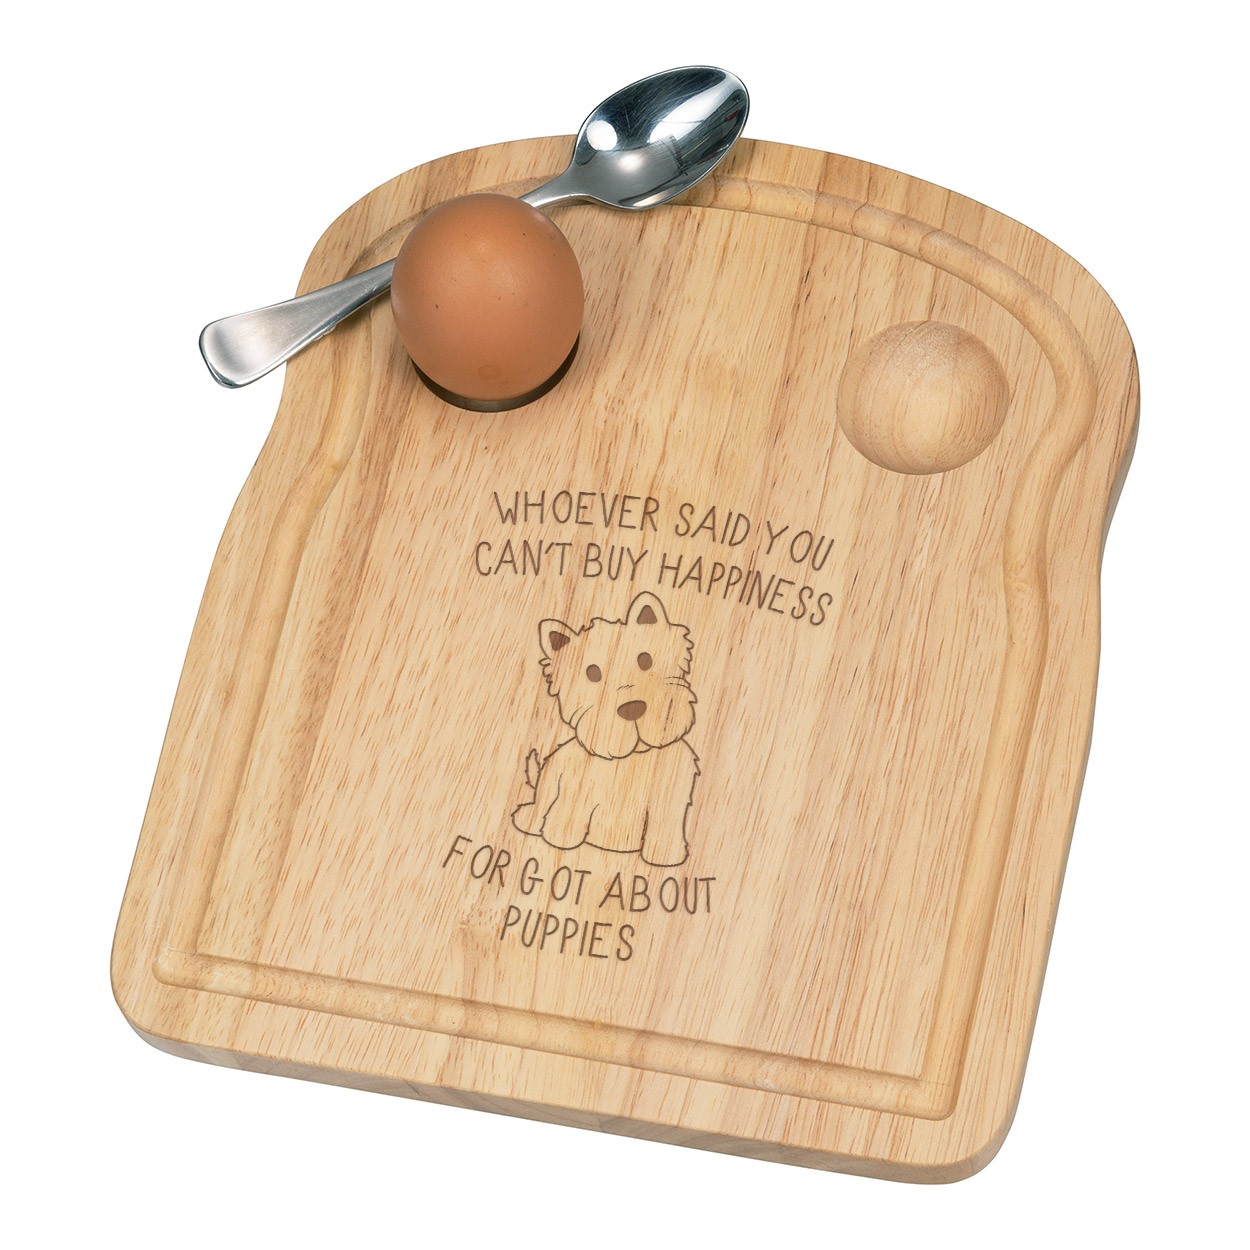 Whoever Said You Can't Buy Happiness Forgot About Puppies Breakfast Dippy Egg Cup Board Wooden